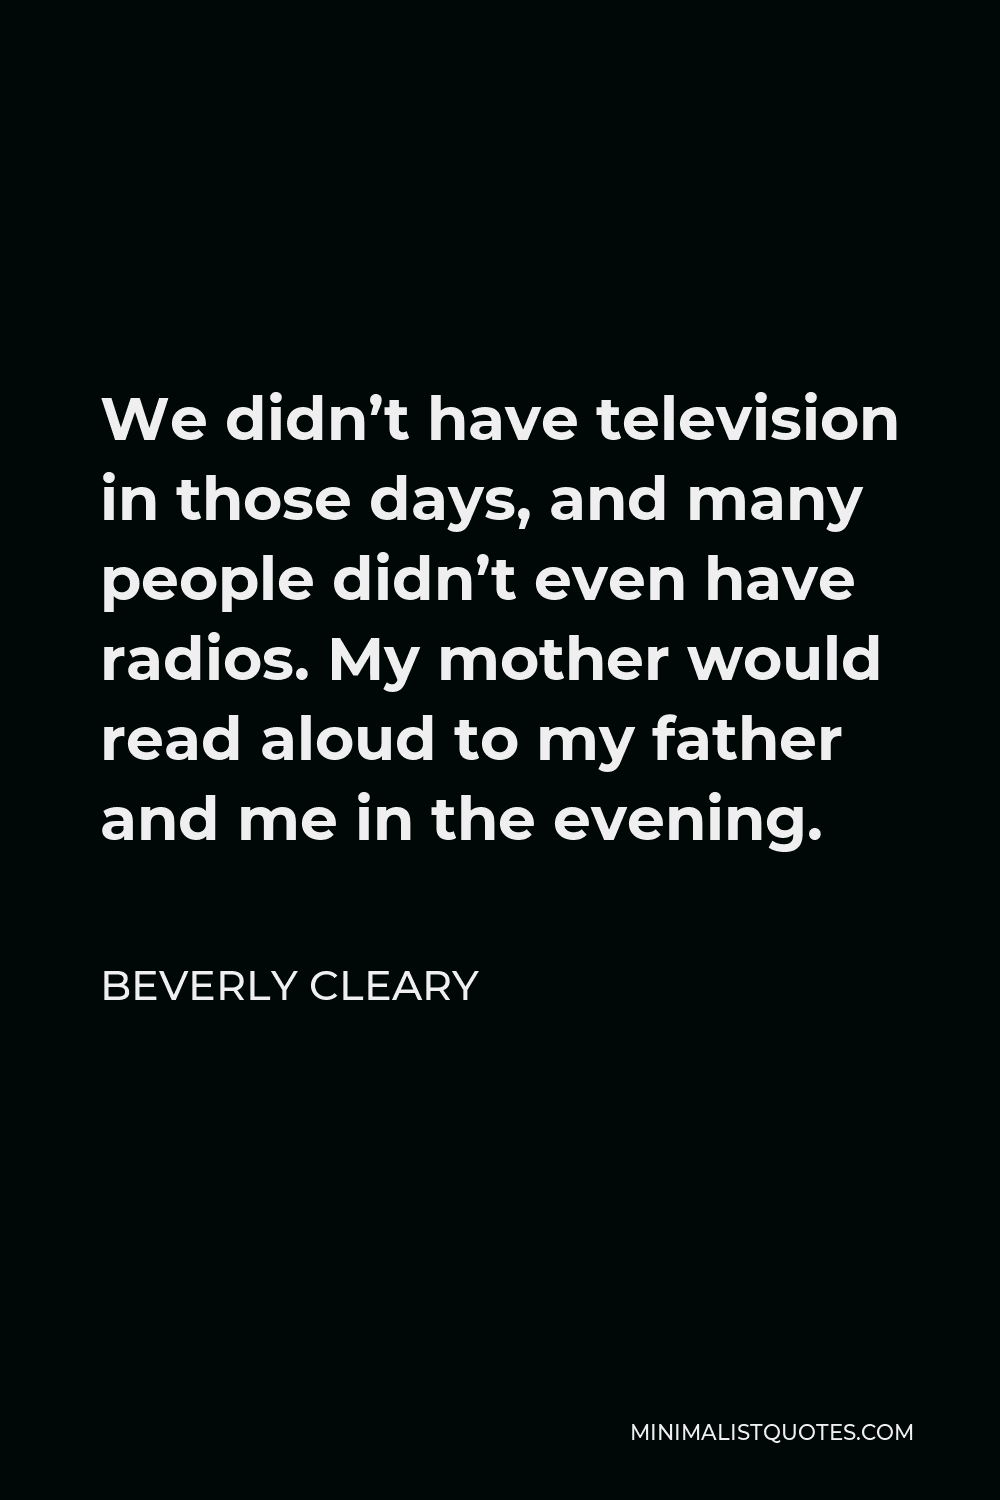 Beverly Cleary Quote - We didn’t have television in those days, and many people didn’t even have radios. My mother would read aloud to my father and me in the evening.